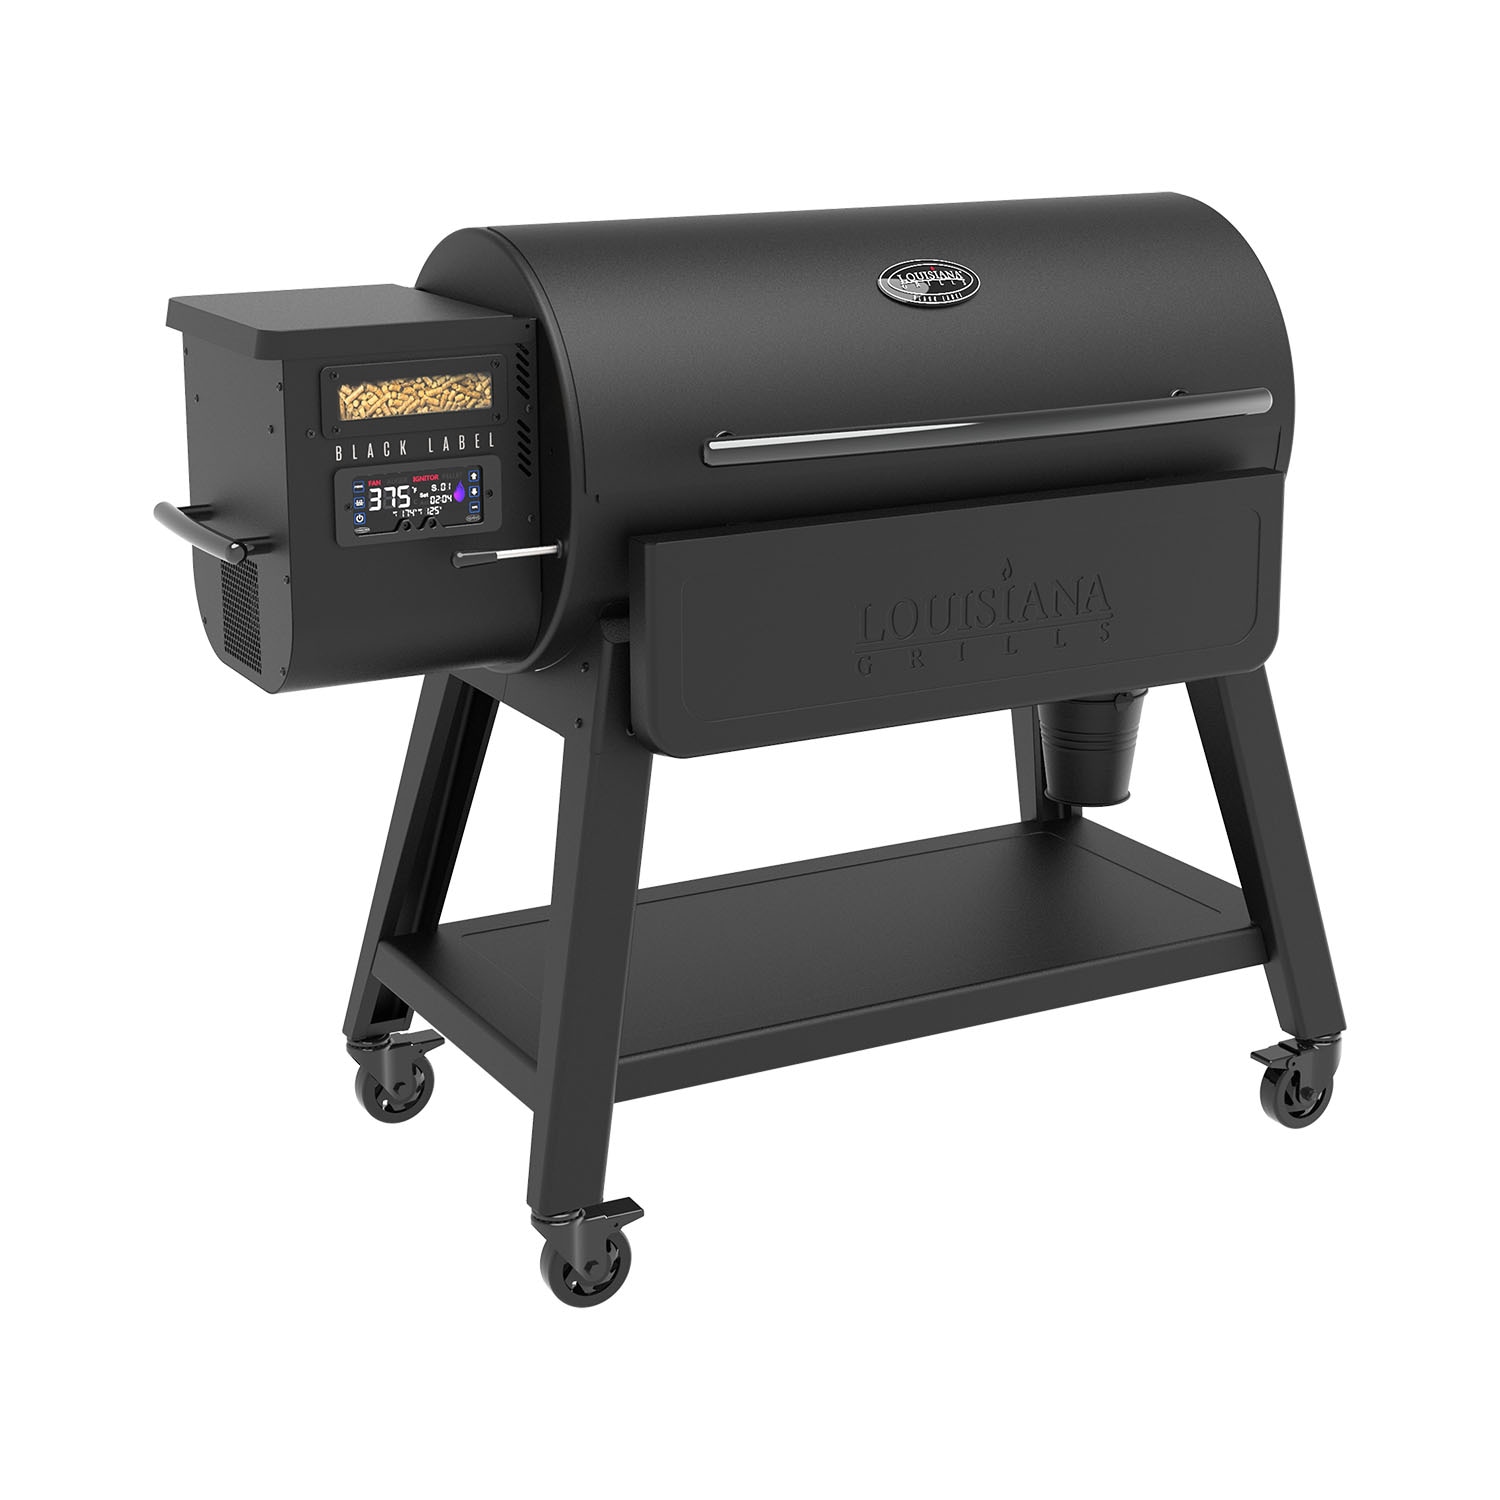 GrillGrate Sear Station for the Louisiana Grills 1000 & 1200